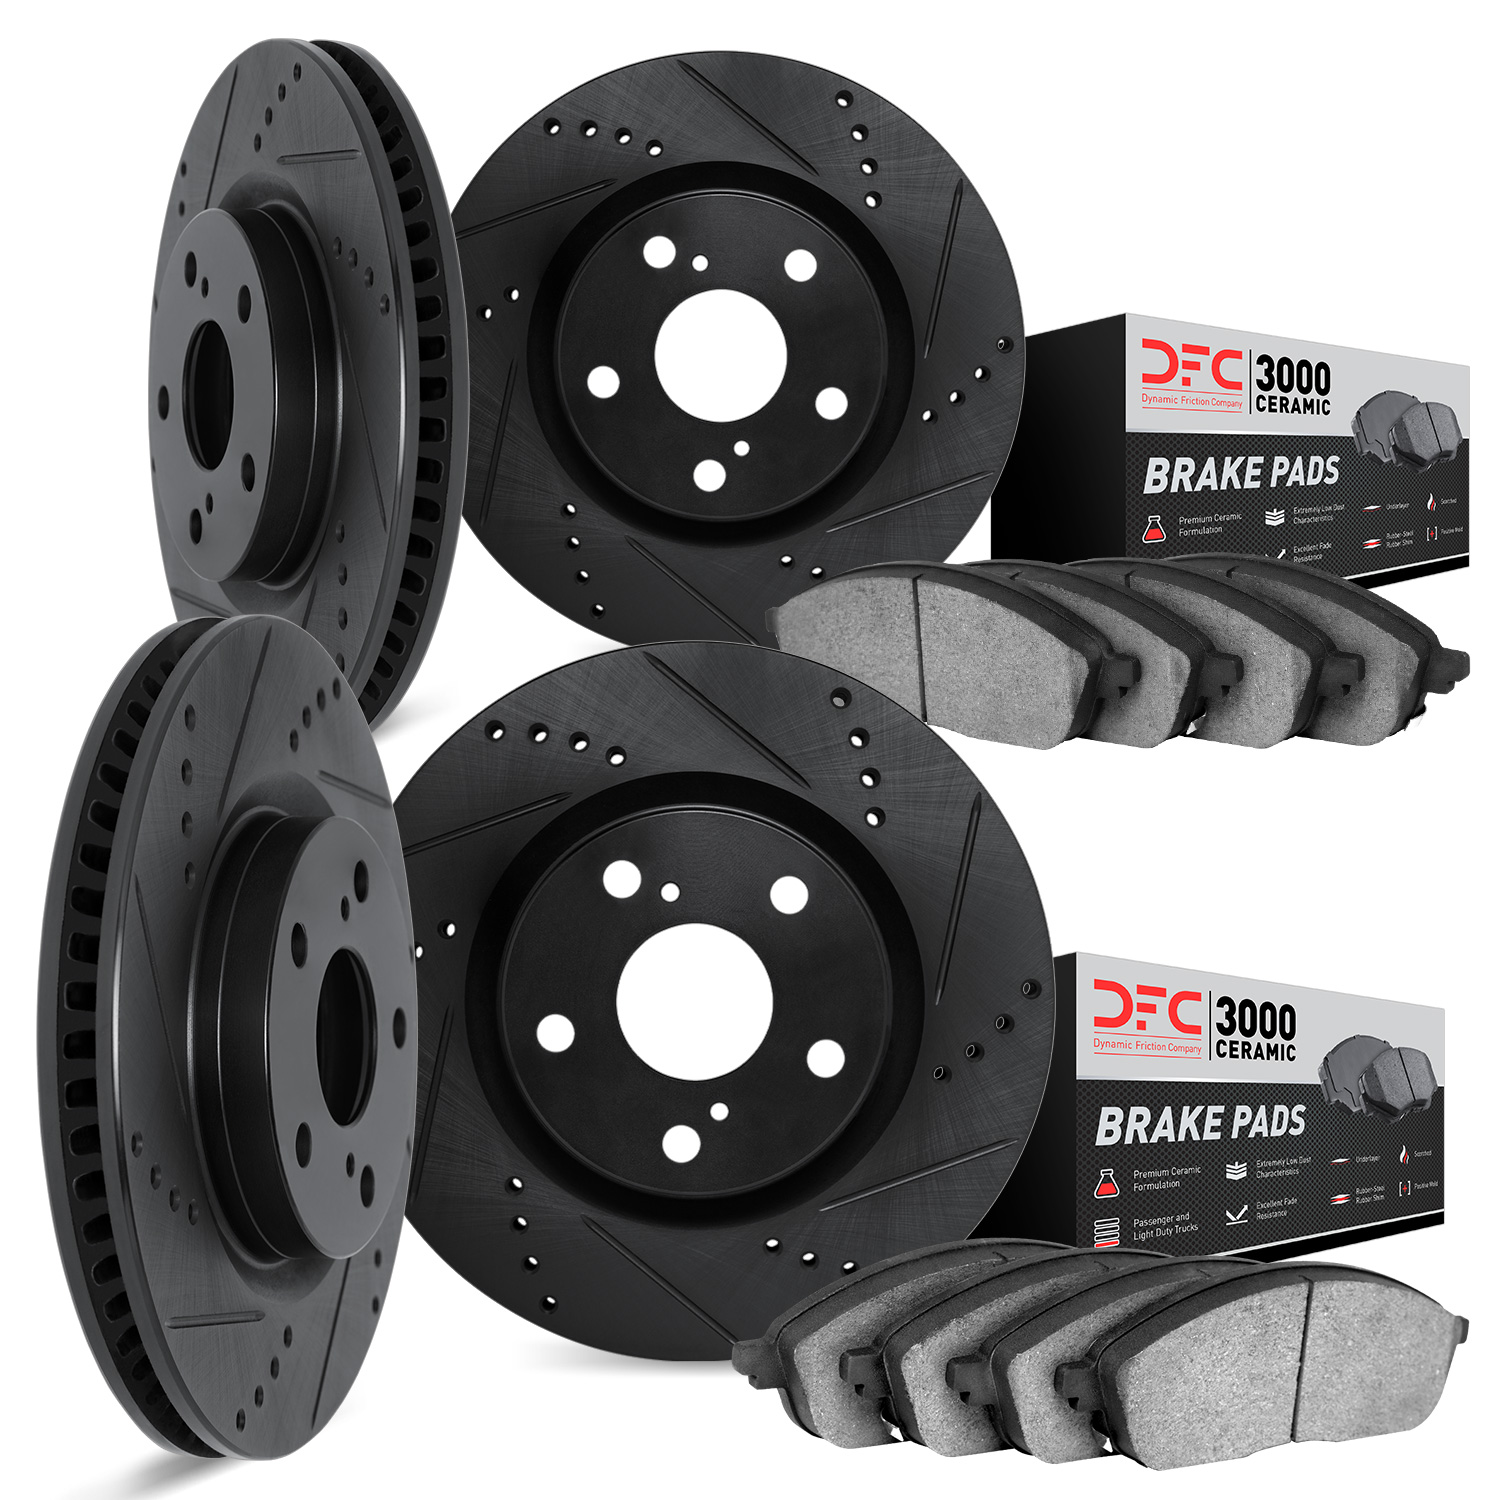 8304-63107 Drilled/Slotted Brake Rotors with 3000-Series Ceramic Brake Pads Kit [Black], 2006-2012 Mercedes-Benz, Position: Fron